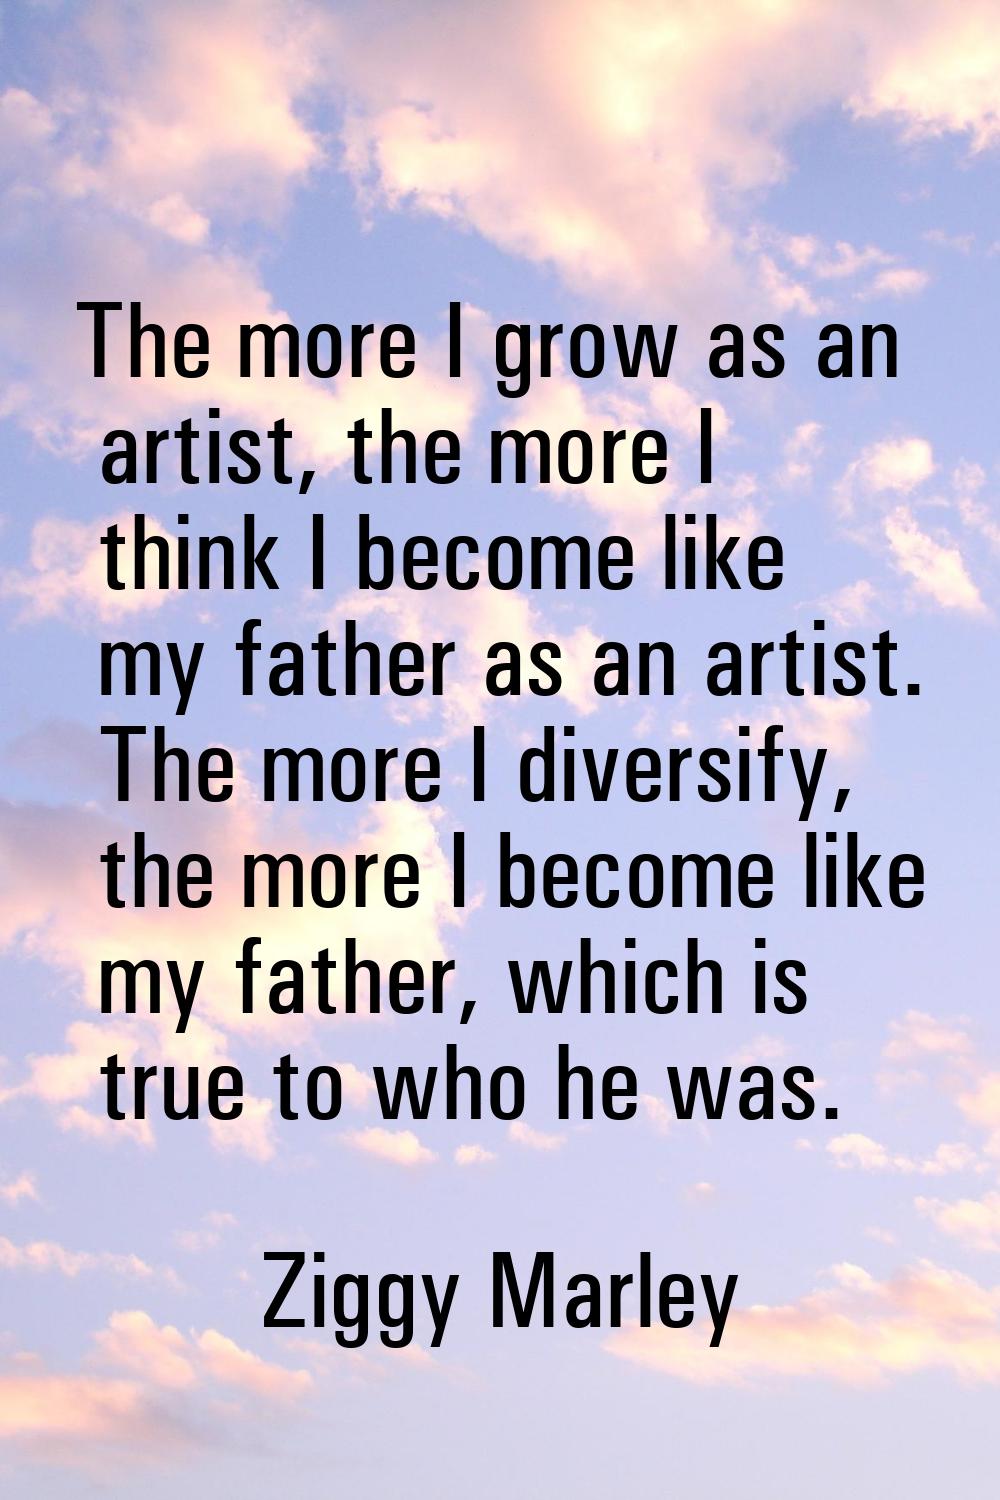 The more I grow as an artist, the more I think I become like my father as an artist. The more I div